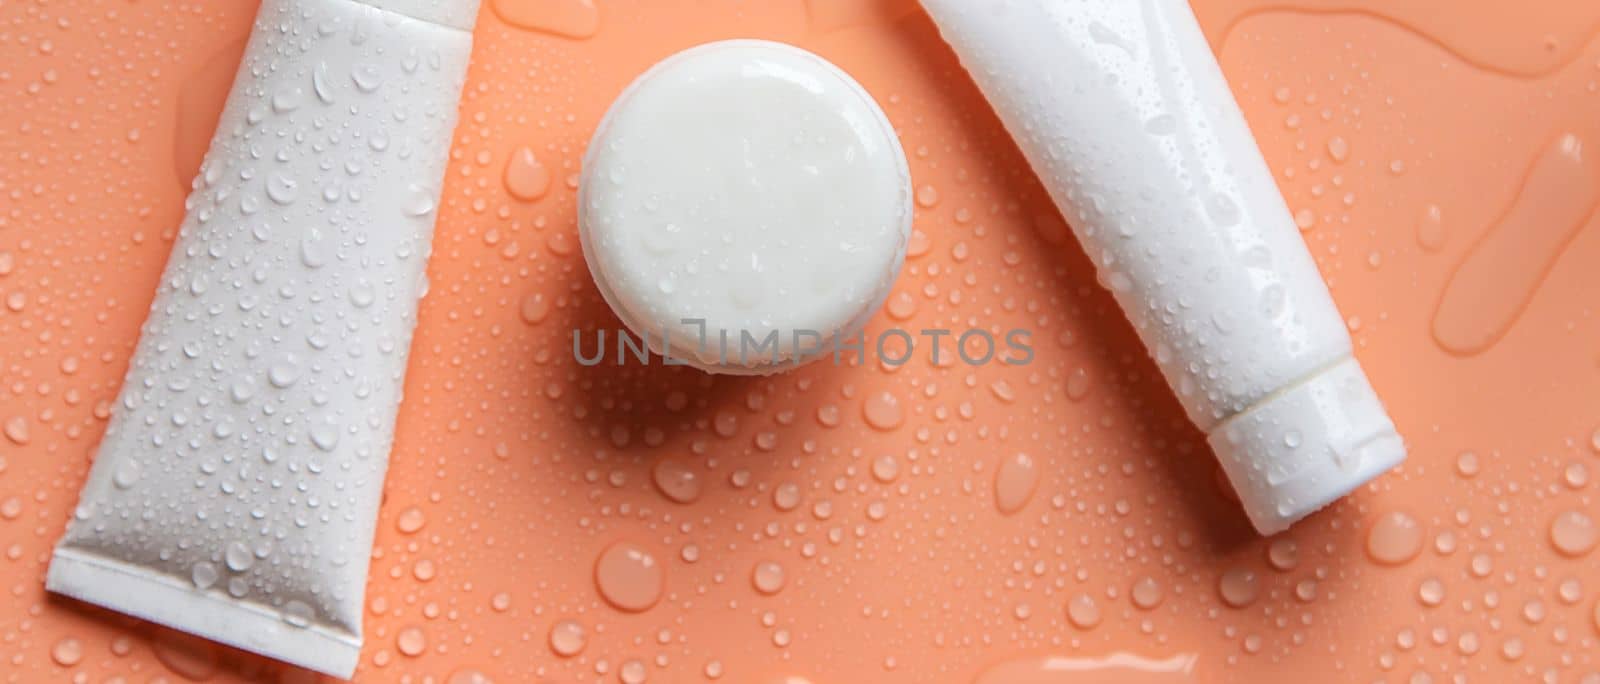 Moisturizing cosmetics on a wet background. Selective focus. Nature.